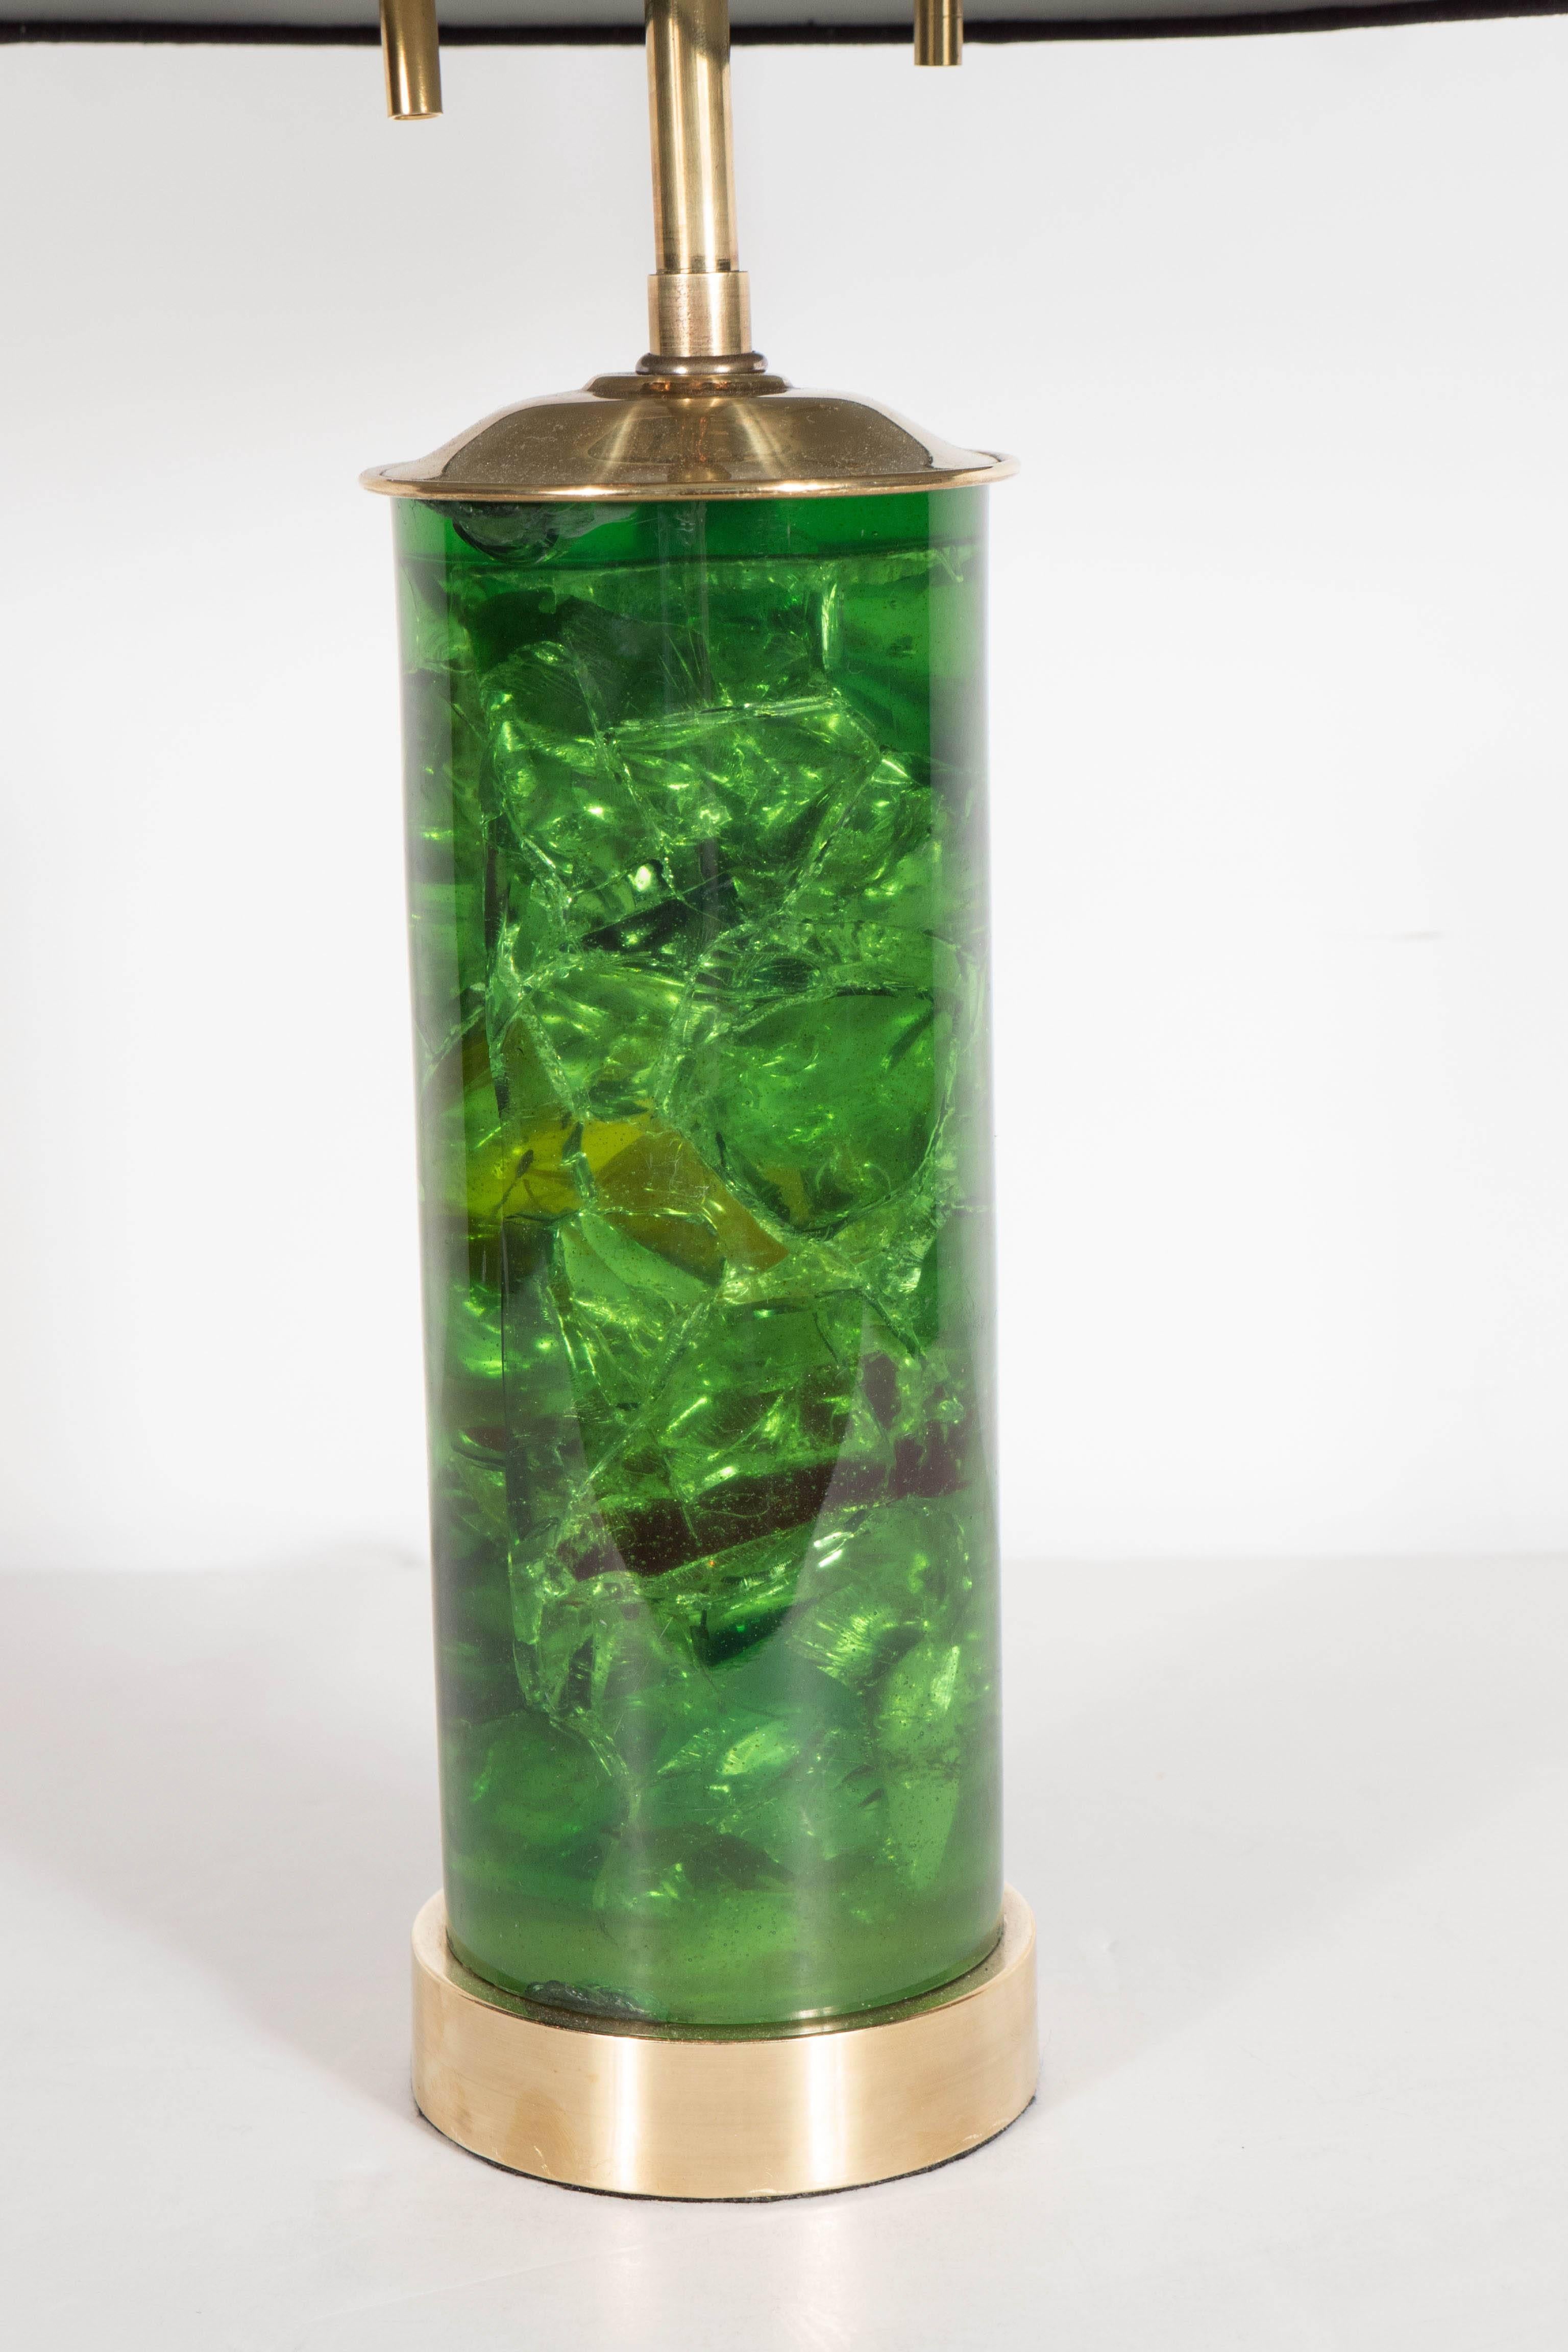 This stunning table lamp from the 1970s features an emerald fractured resin base on a brushed brass mount and fittings. The fractures in the resin catch the light creating a visual effect. The lamp has two independently operated bulbs and has been